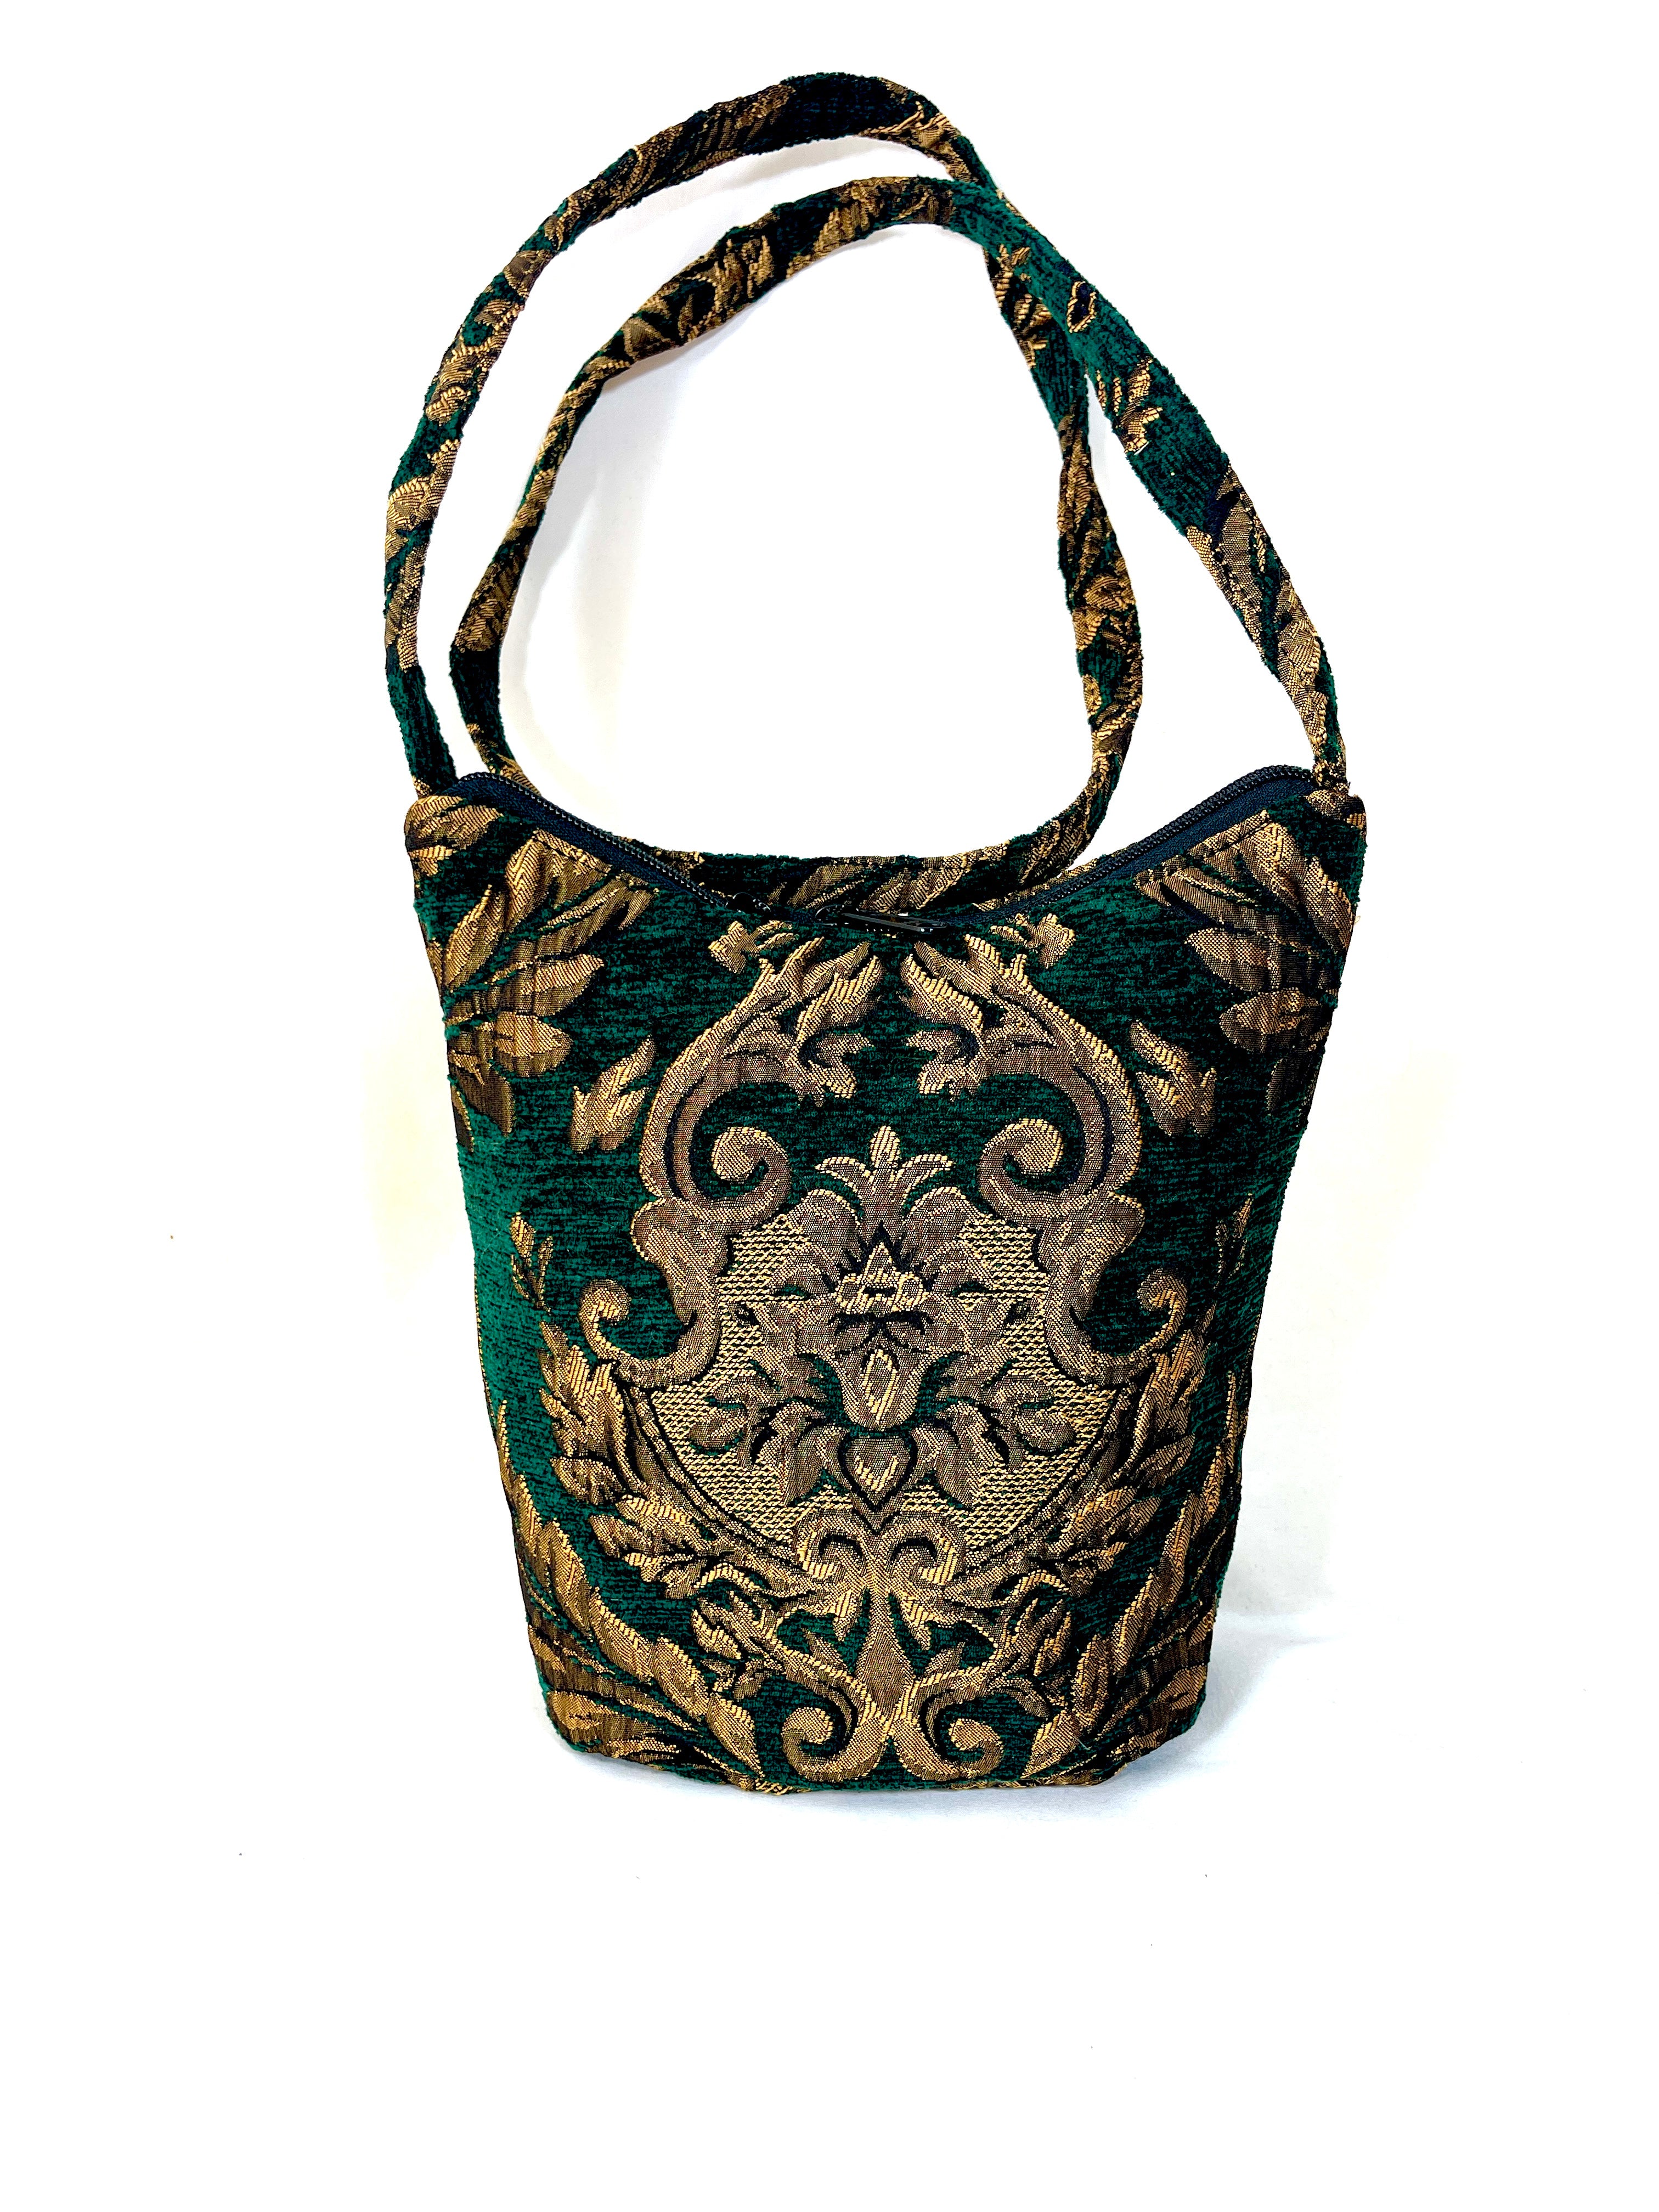 Bucket Purse In Royal Green Tapestry